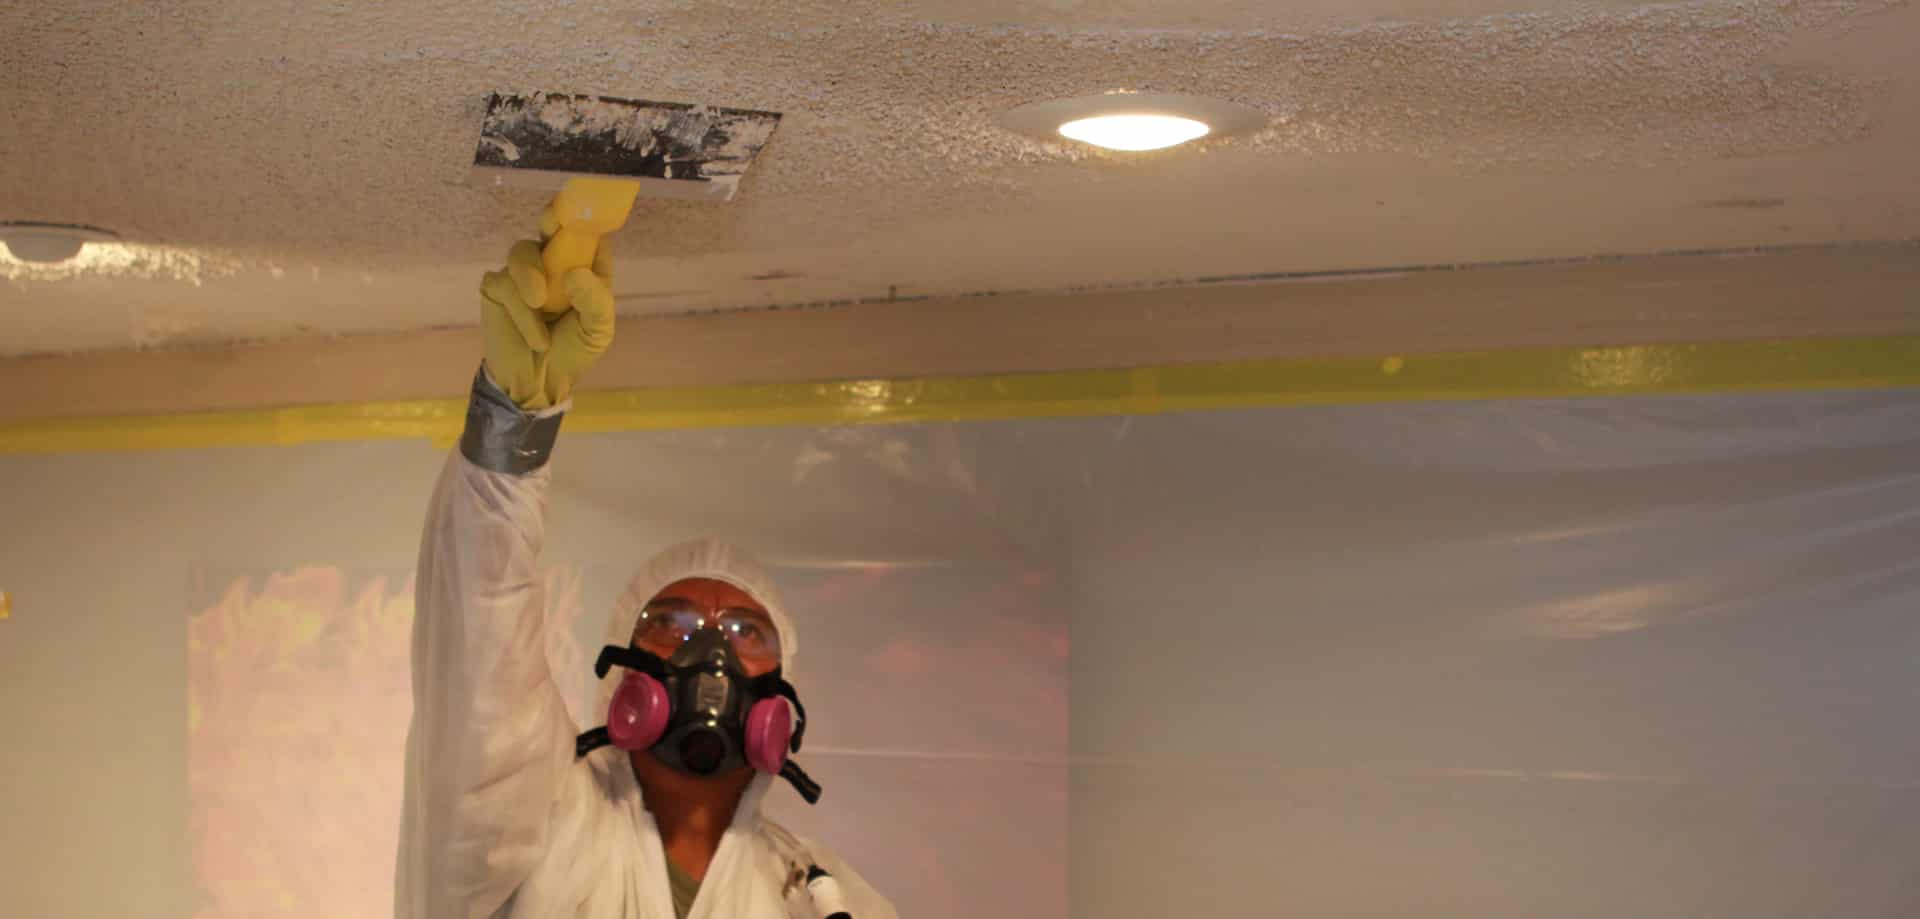 Commercial Popcorn Ceiling Removal-Port St Lucie Popcorn Ceiling Removal _ Drywall Repair Pros